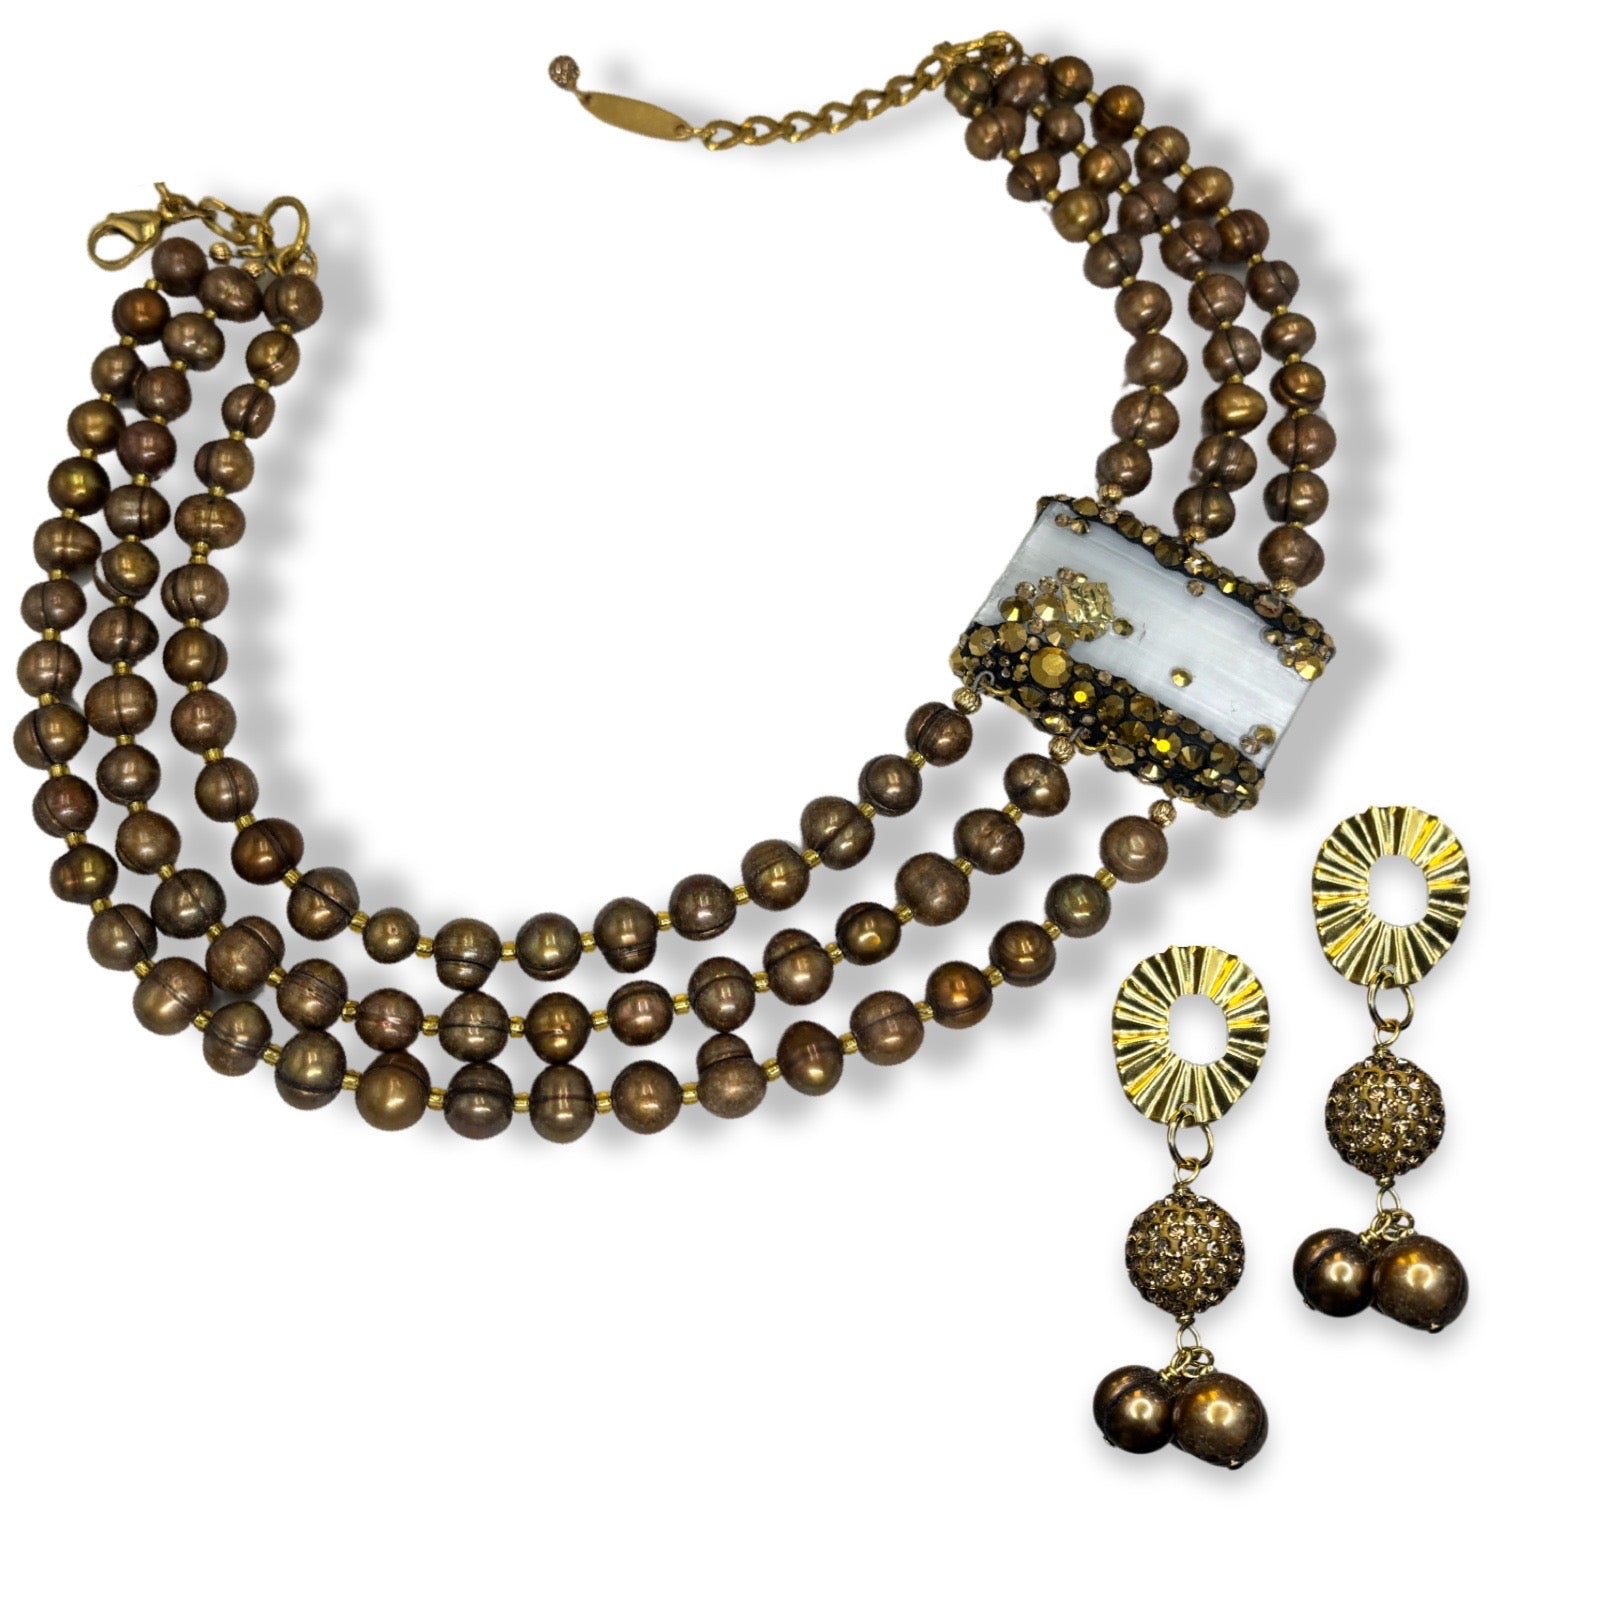 Copy of C17472 - Copy of Character Grey Pearl Necklace OOAK Cerese D, Inc.   